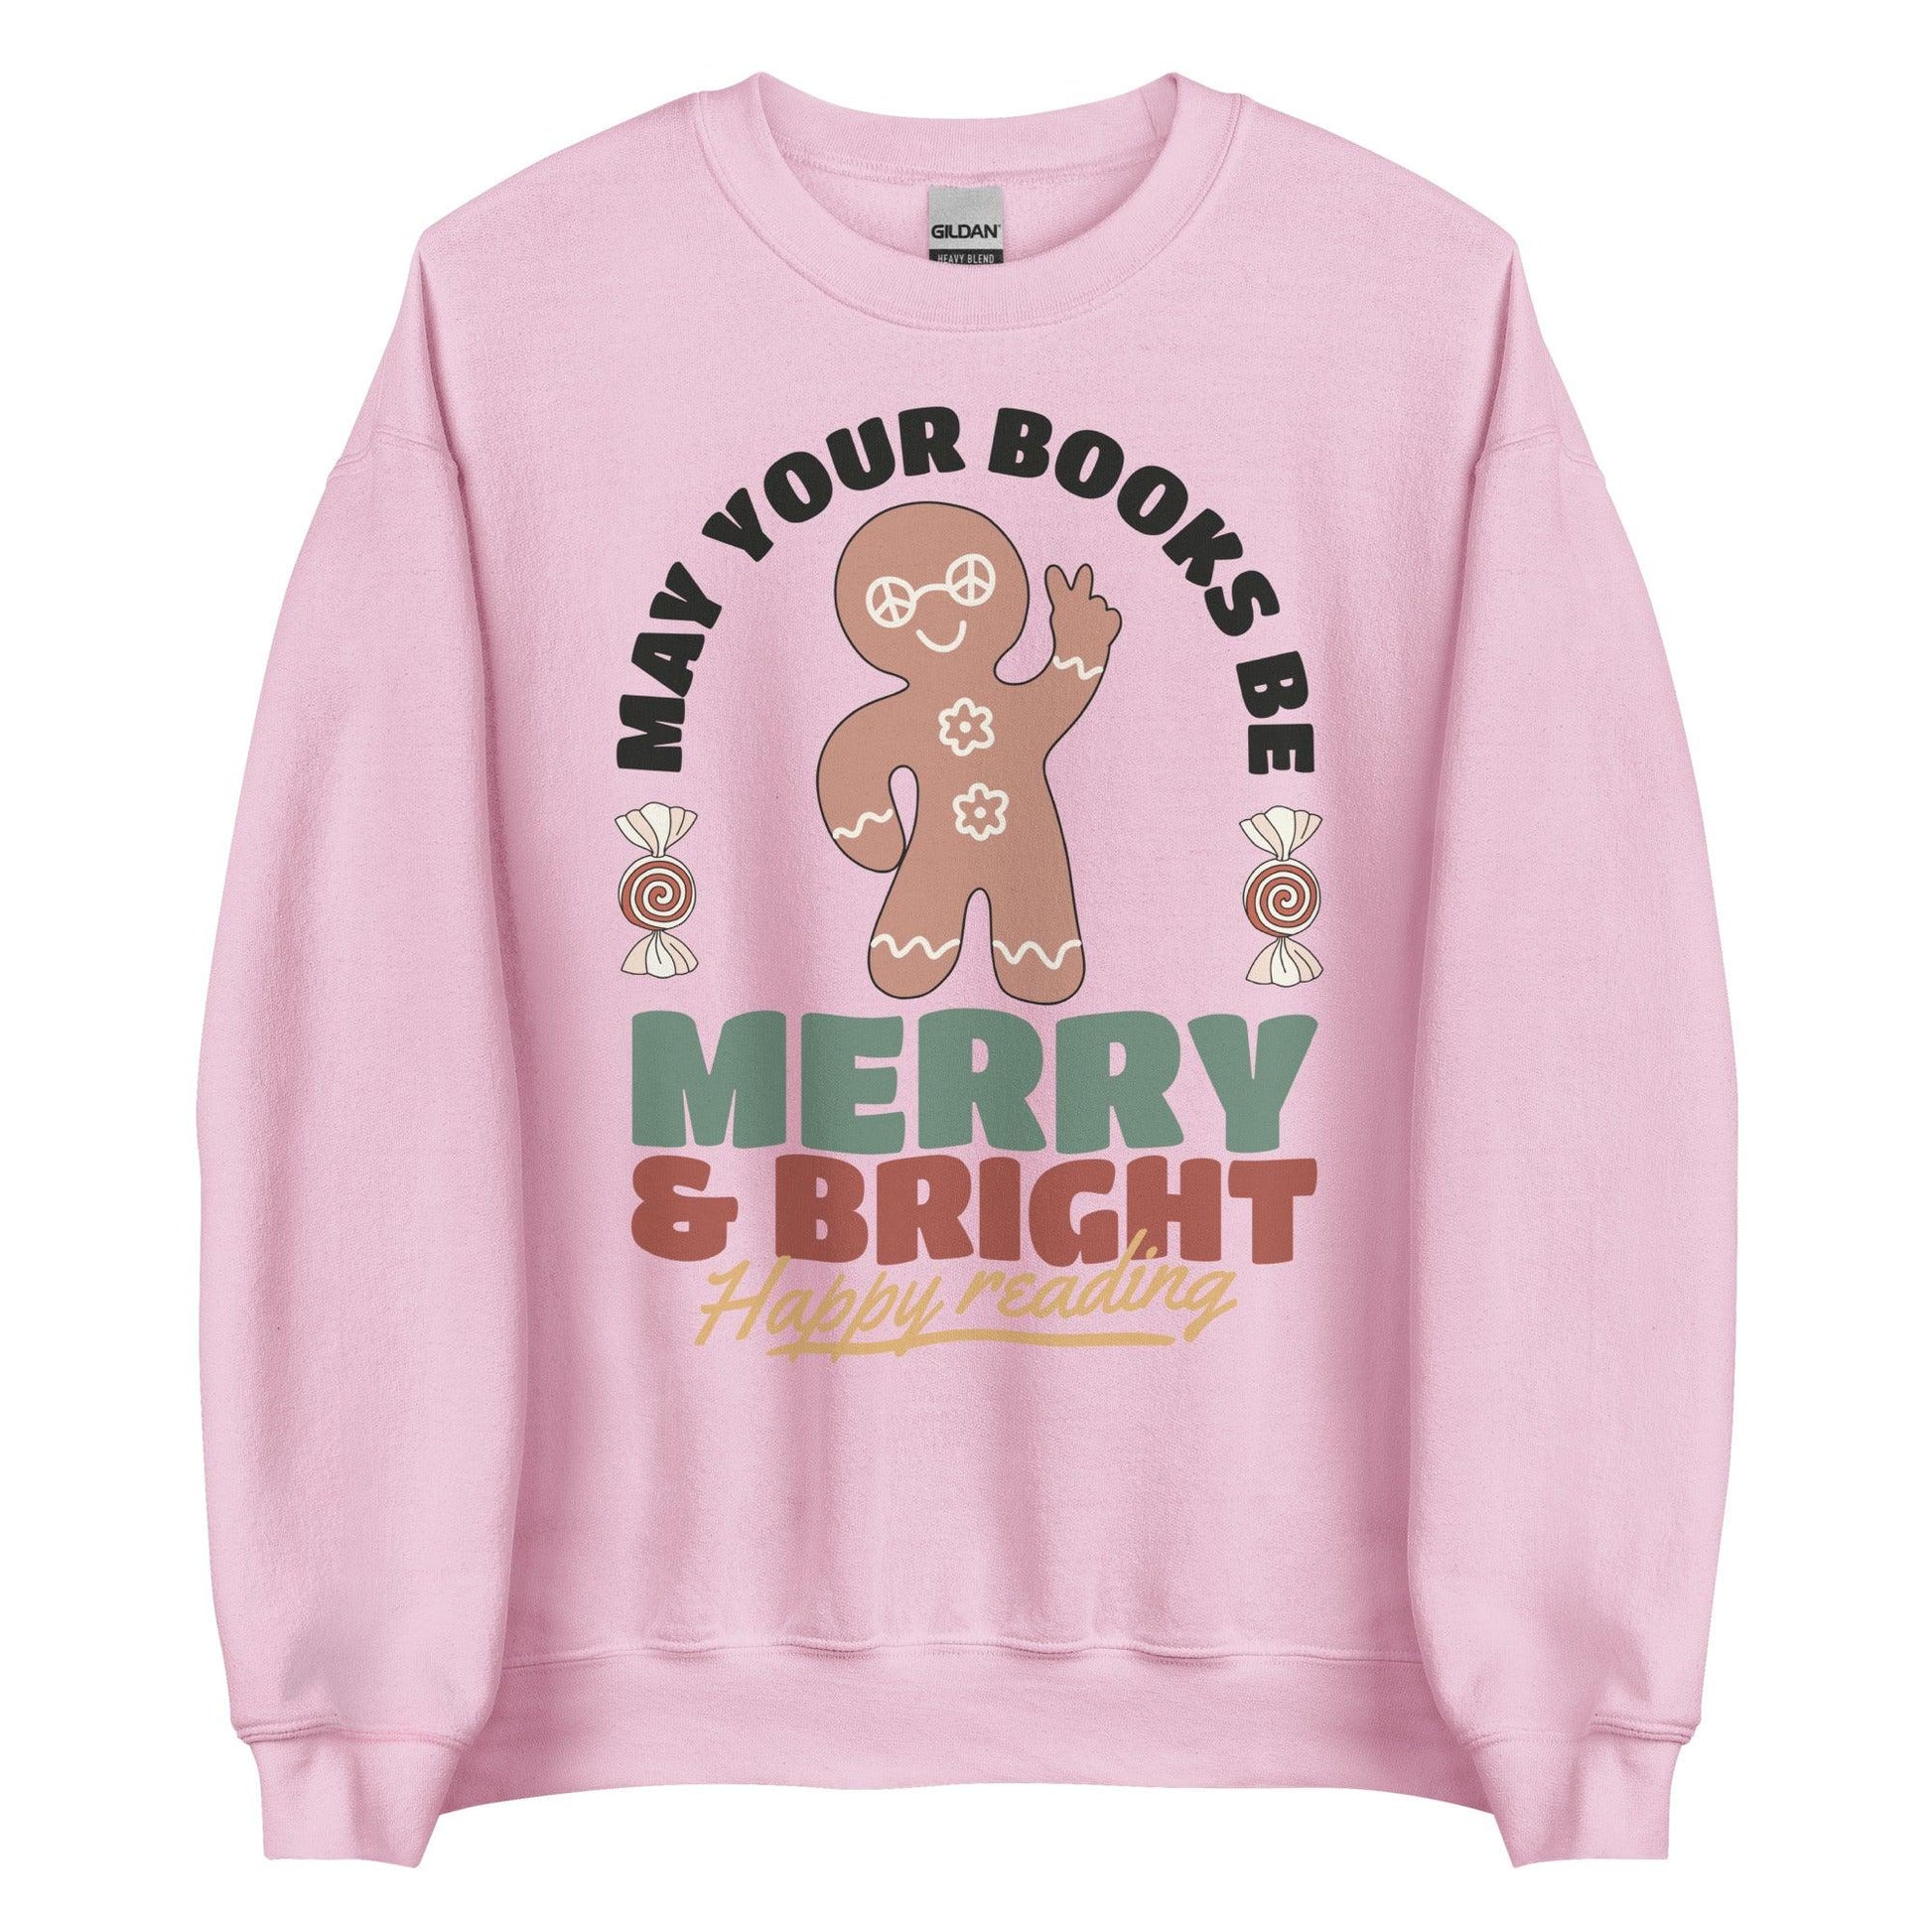 May Your Books Be Merry & Bright Sweater - The Bean Workshop - book lover, bookish, christmas, sweatshirt